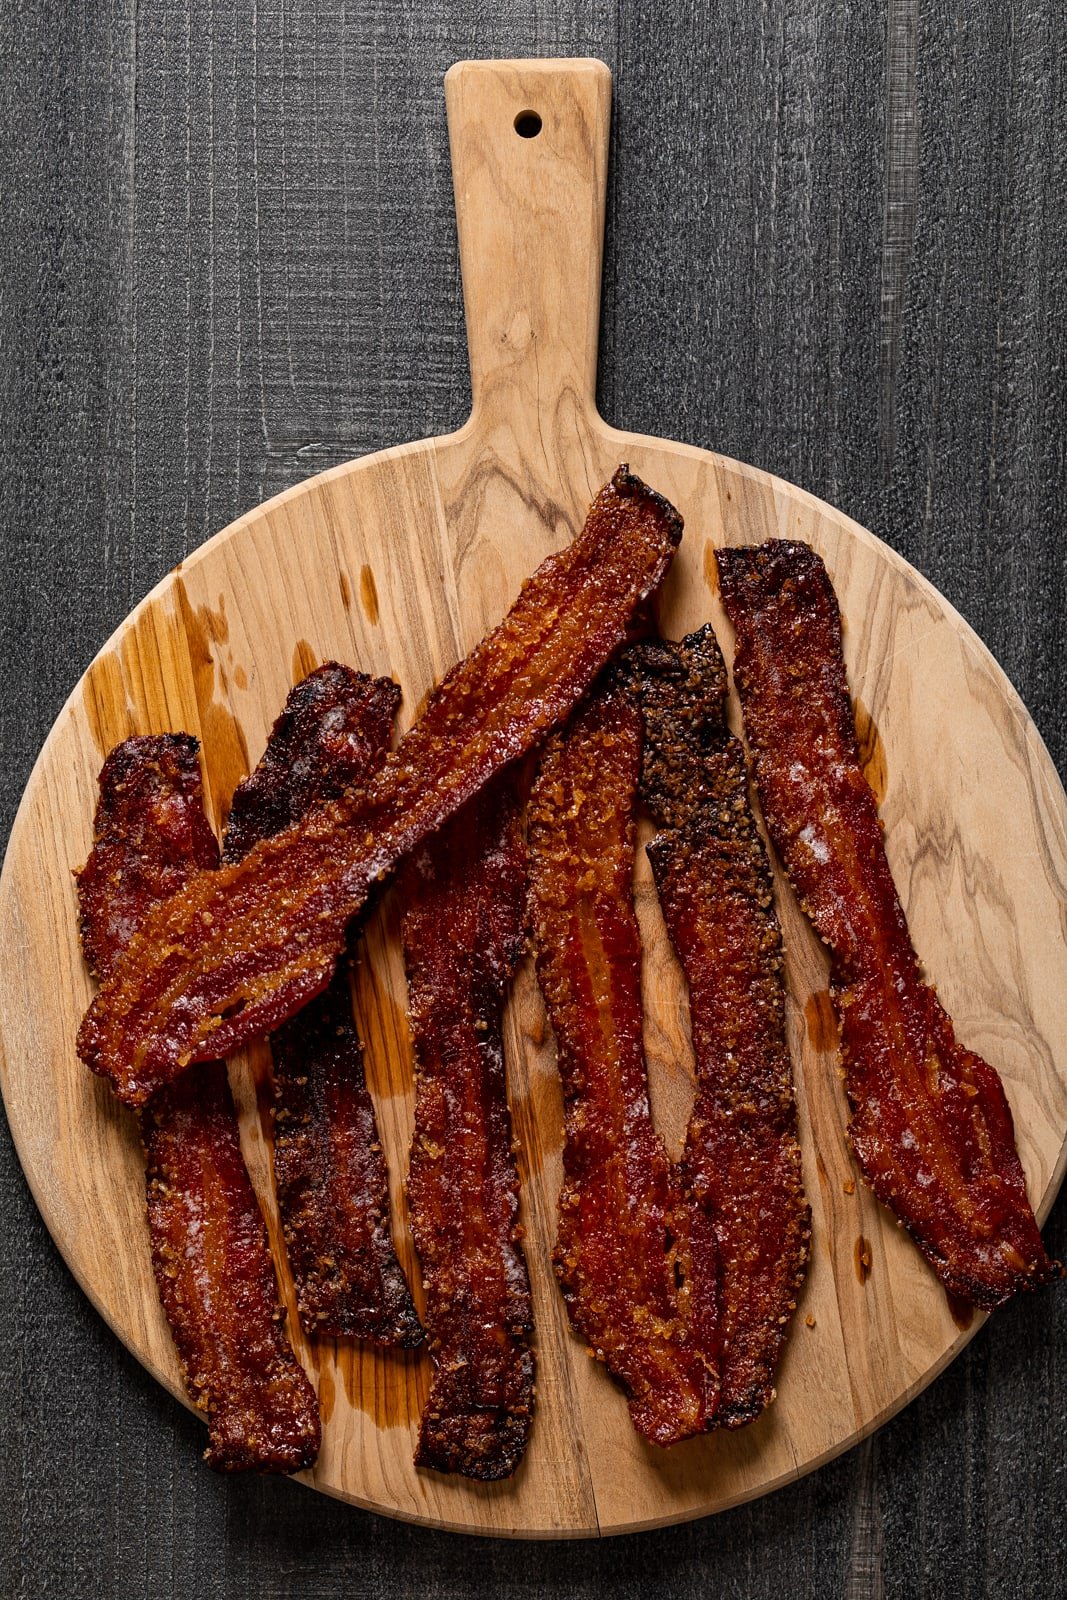 Cooked bacon on a wooden board